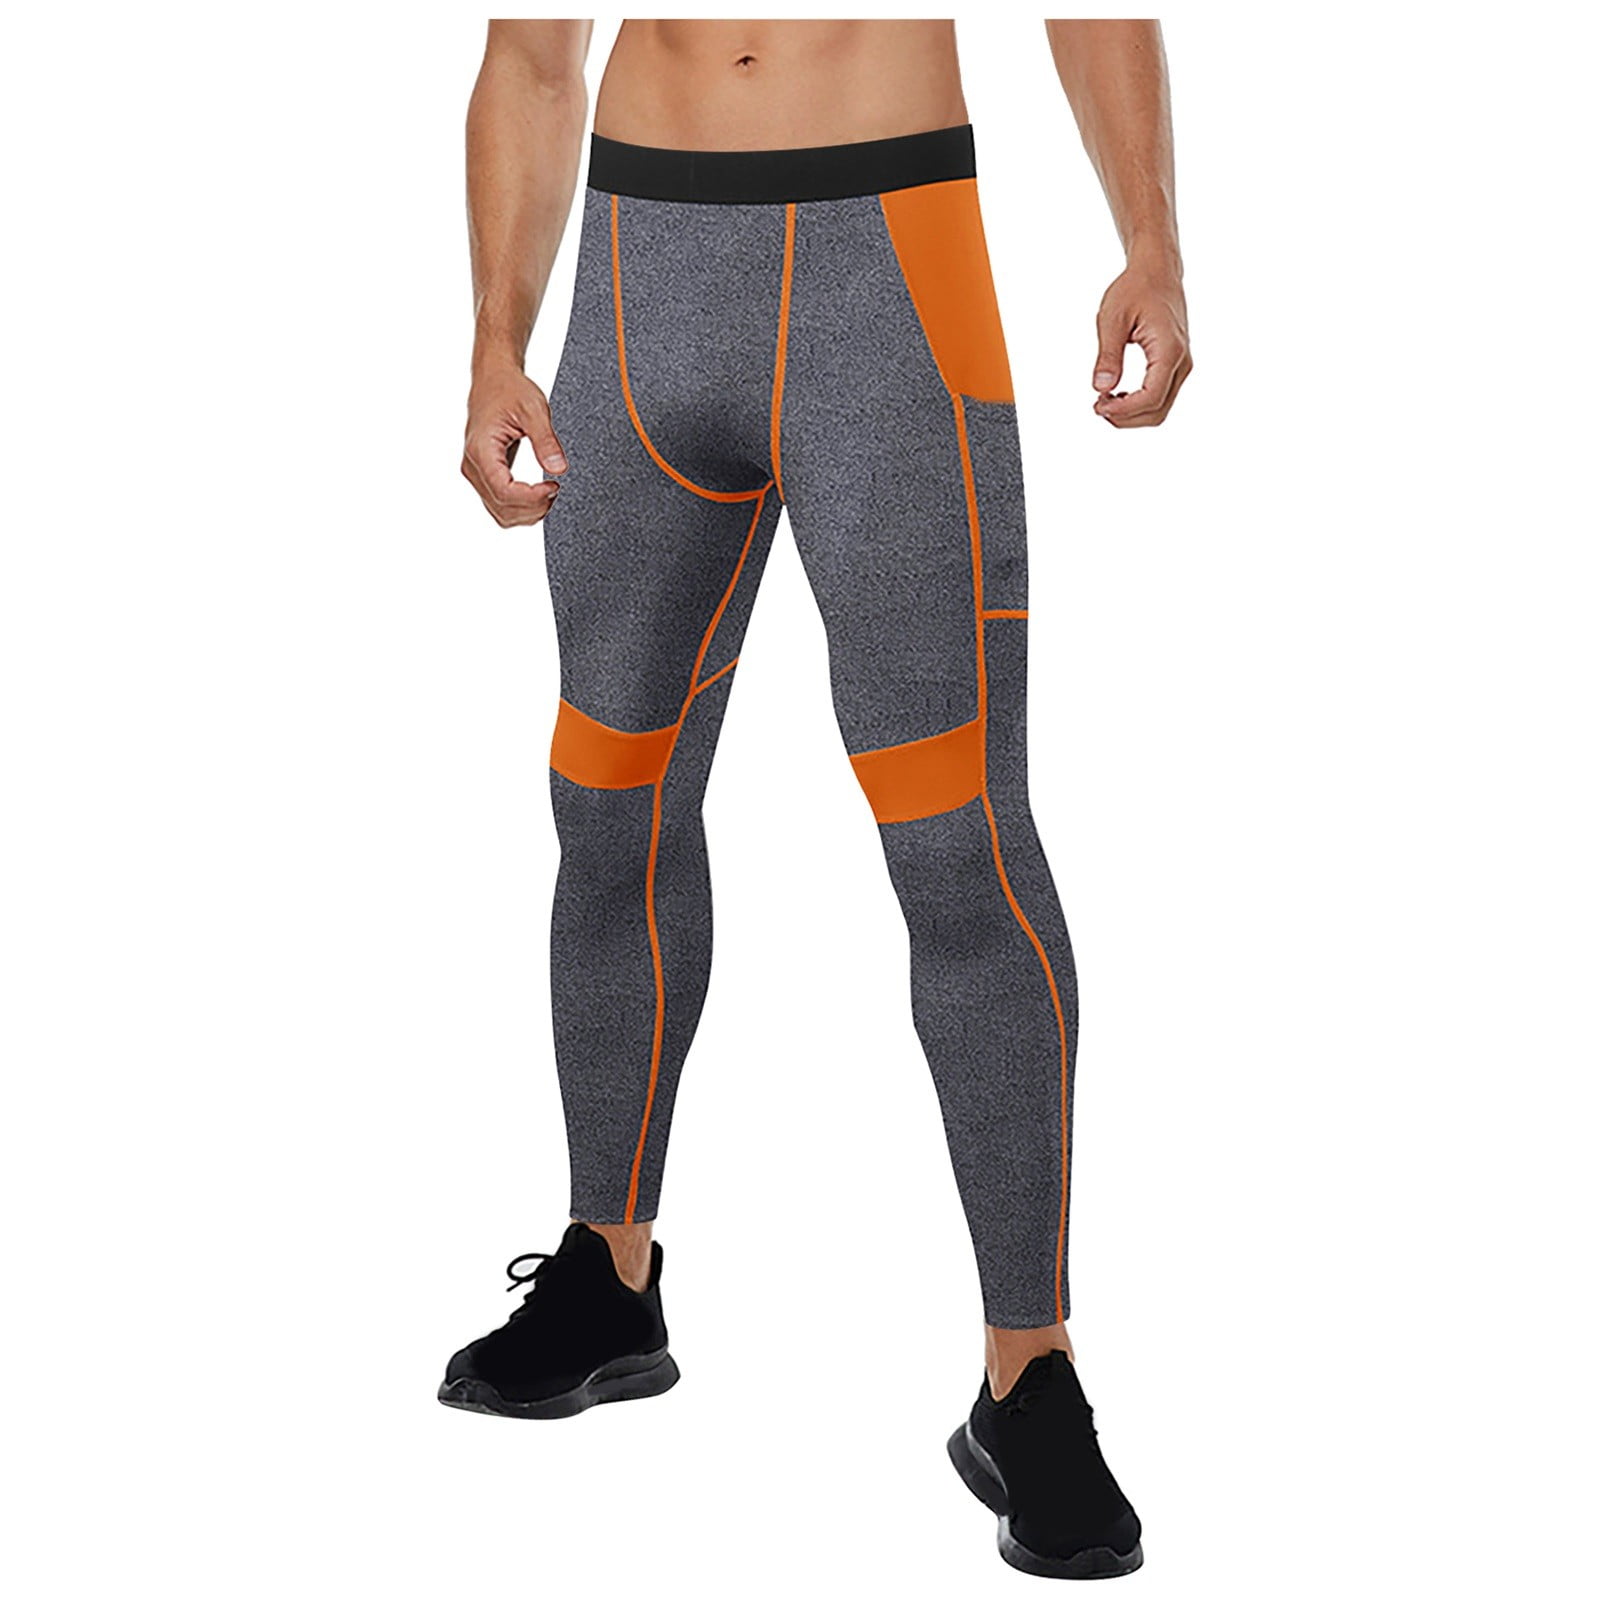 Under Armour Men's 2 in 1 outdoorsports pants fitness leisure Quick Dry pants UK 